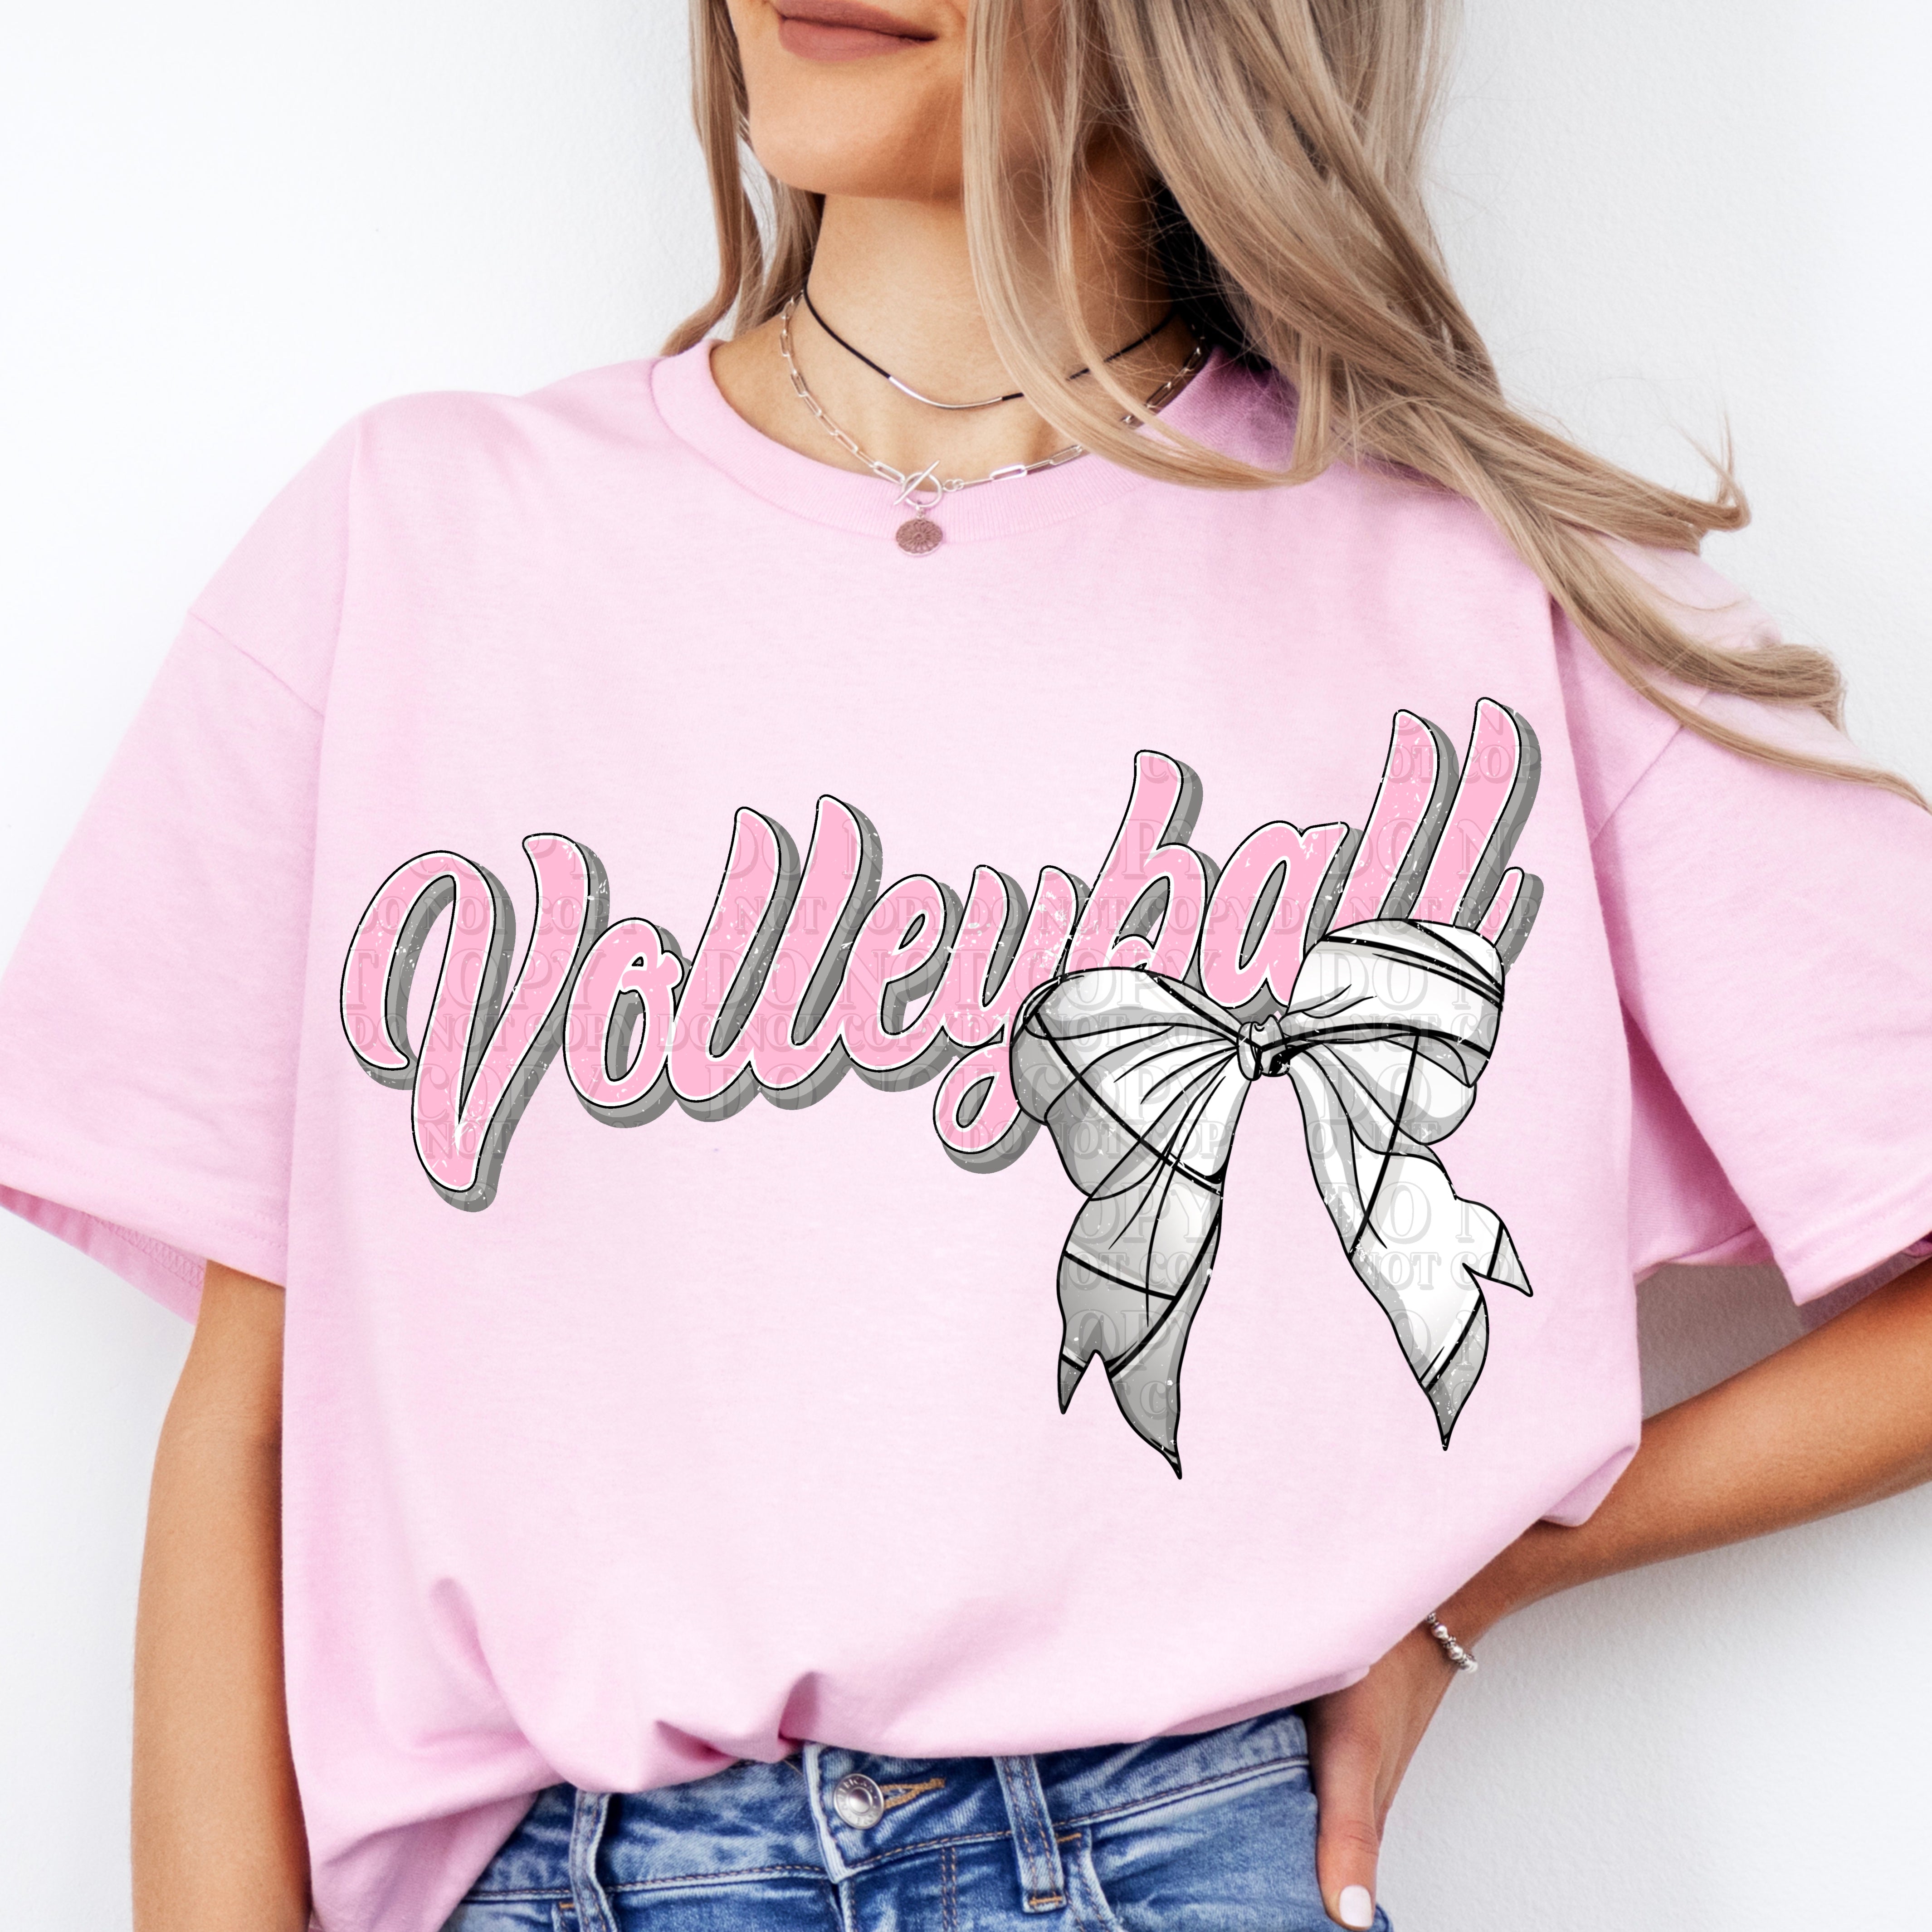 Volleyball Mock up